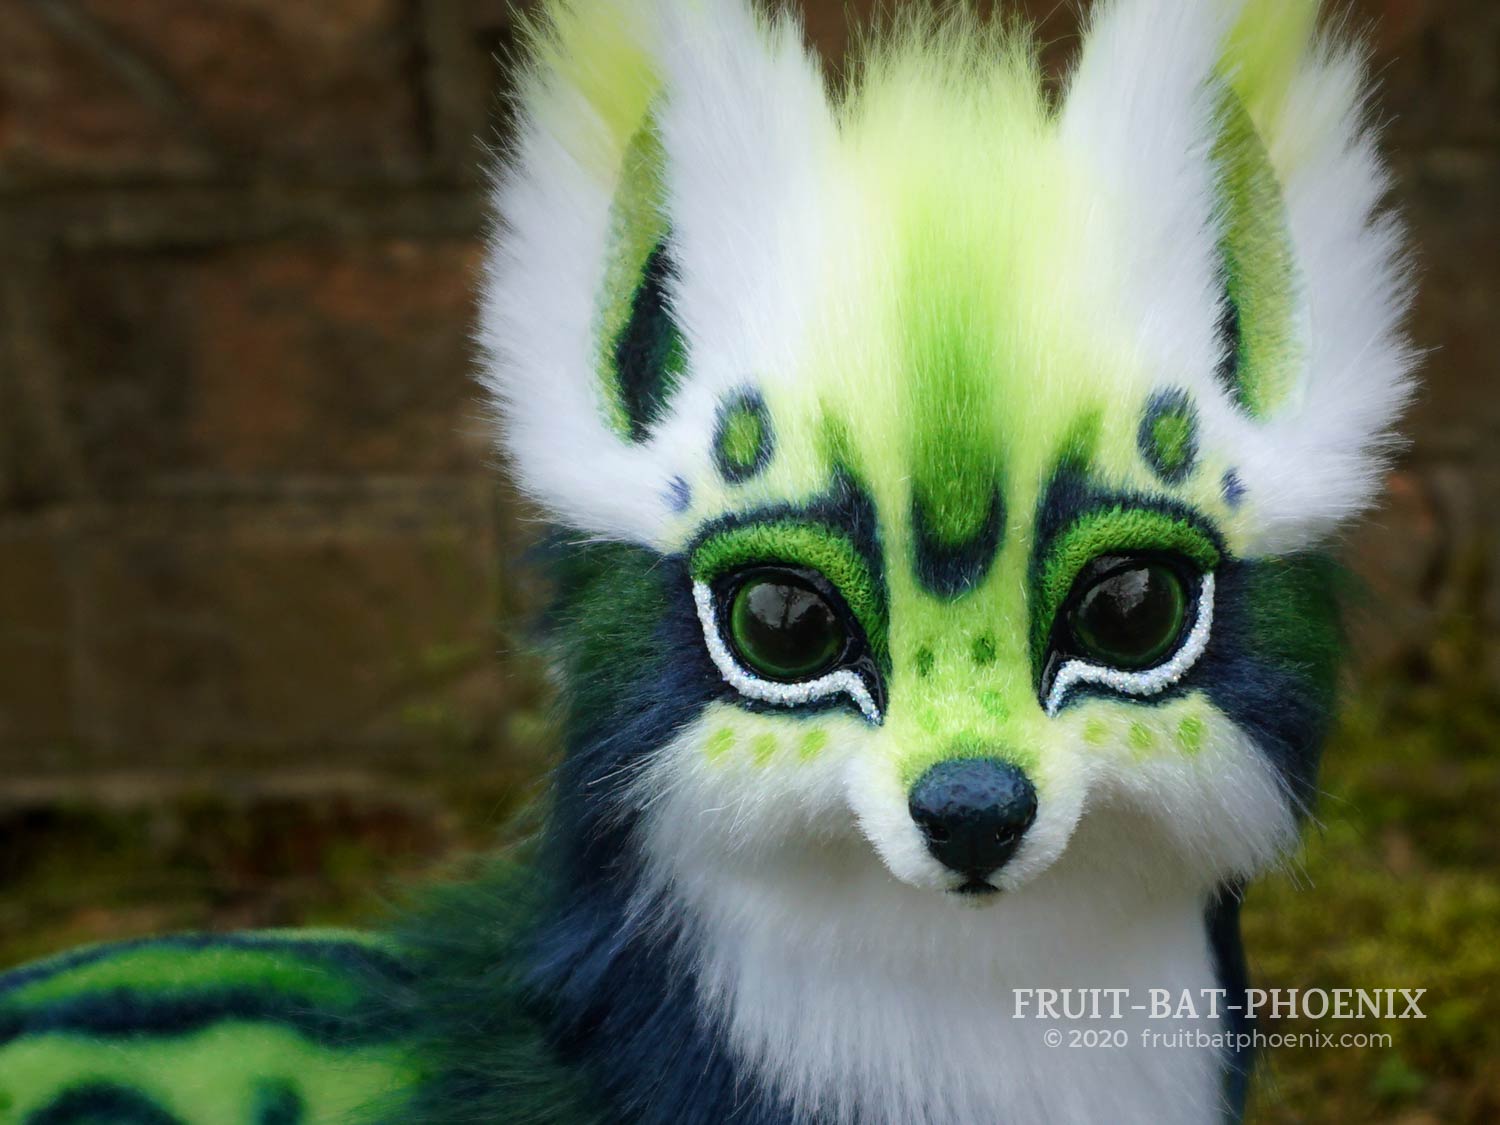 Fully flocked/furred face of Blue-Green Spotted Fox